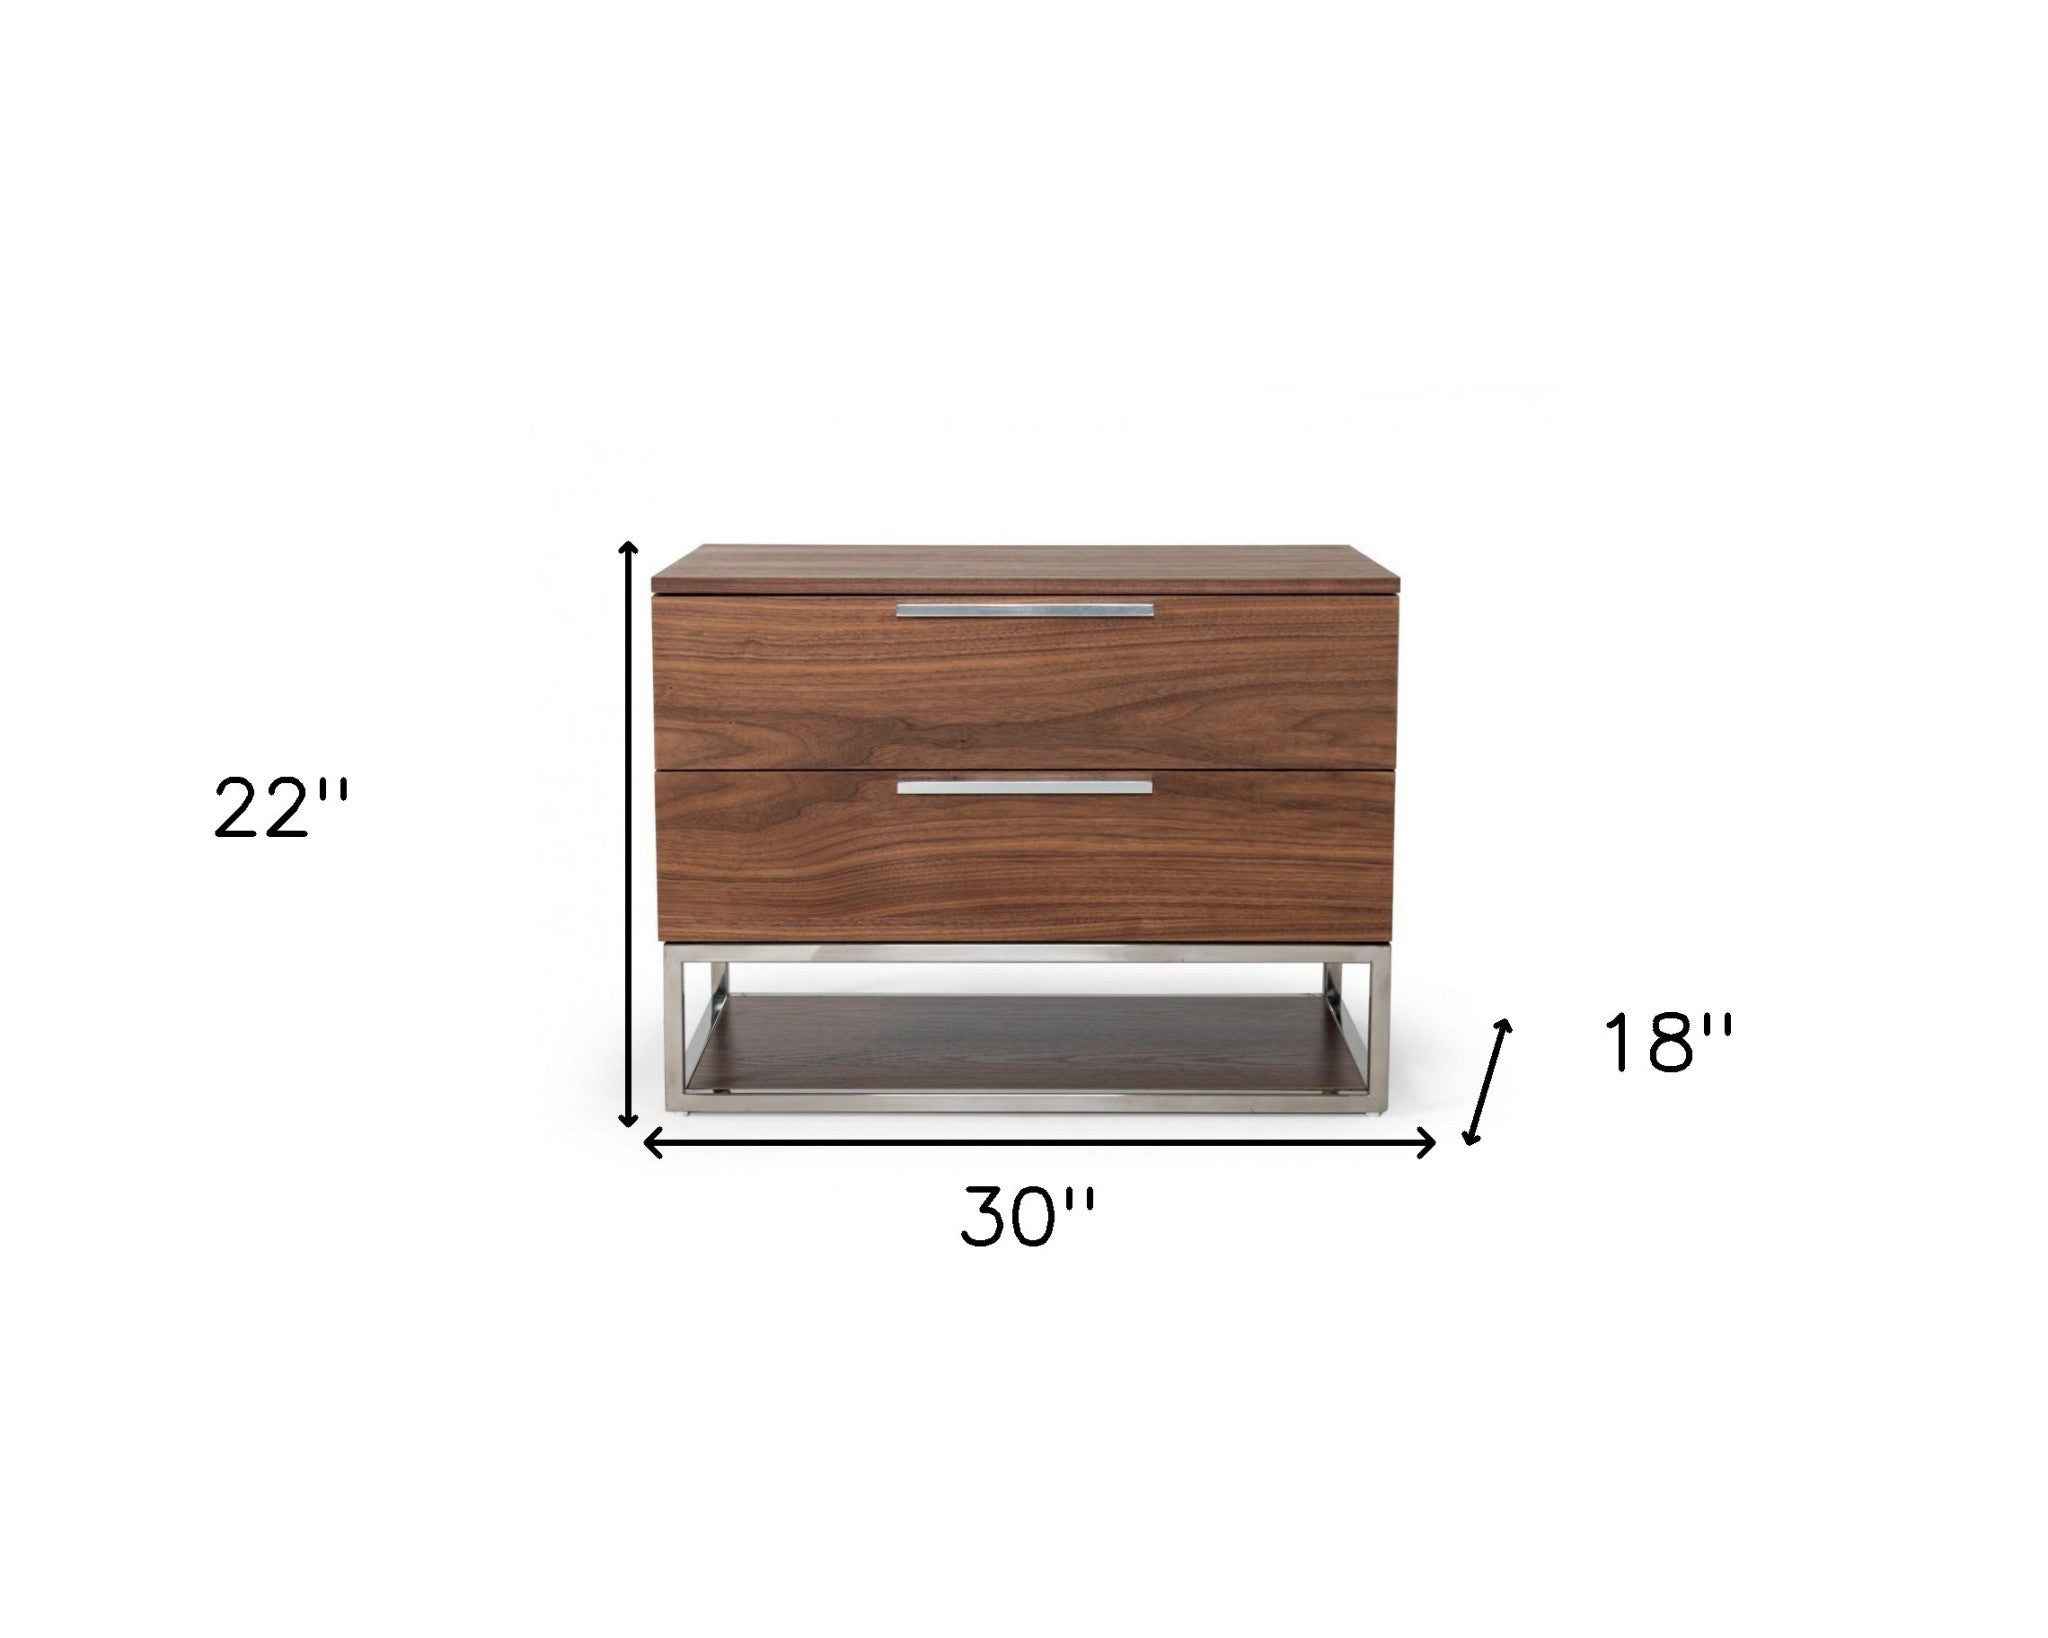 Contemporary Walnut and Stainless Steel Nightstand with Two Drawers